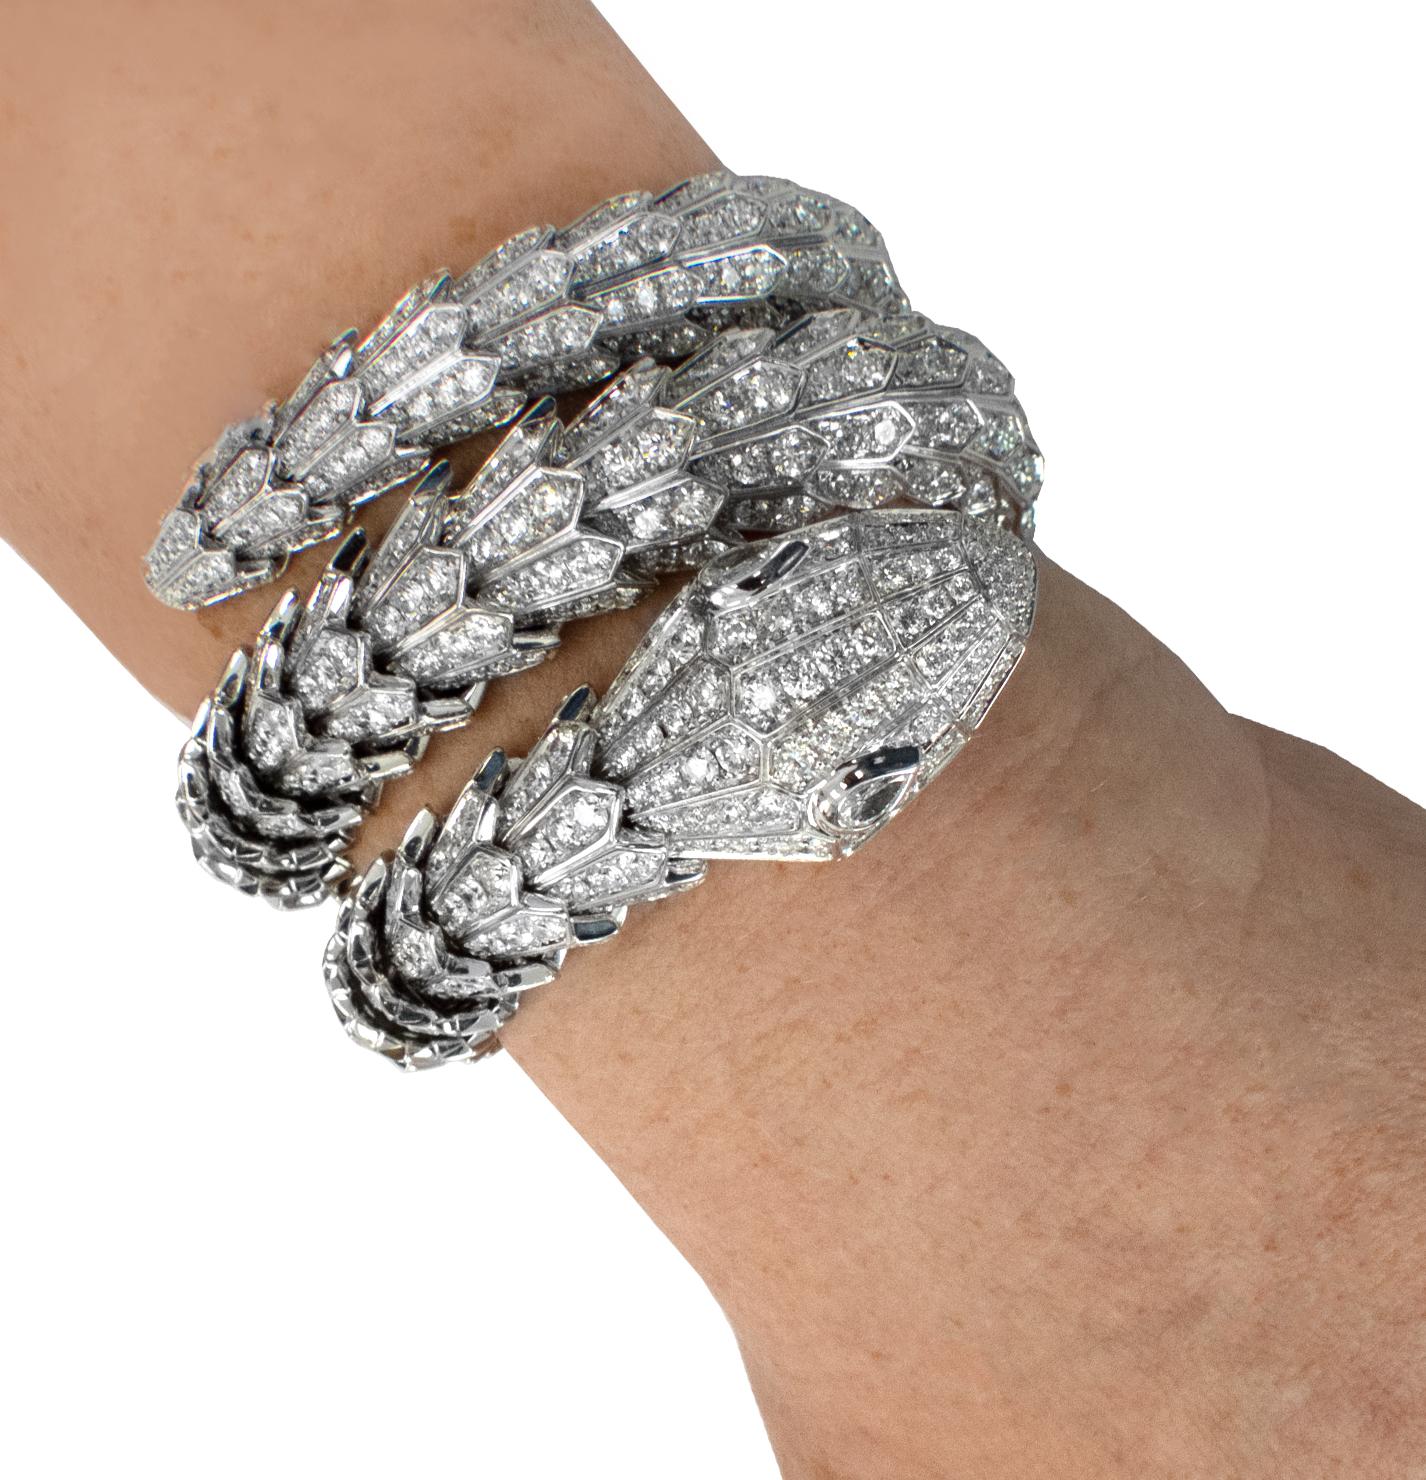 From the esteemed ateliers of Bvlgari Italy emerges a masterpiece that epitomizes grandeur and sophistication – the Bvlgari Serpenti Diamond Triple Wrap Bangle Bracelet. Meticulously crafted in the ethereal luminance of 18-karat white gold, this